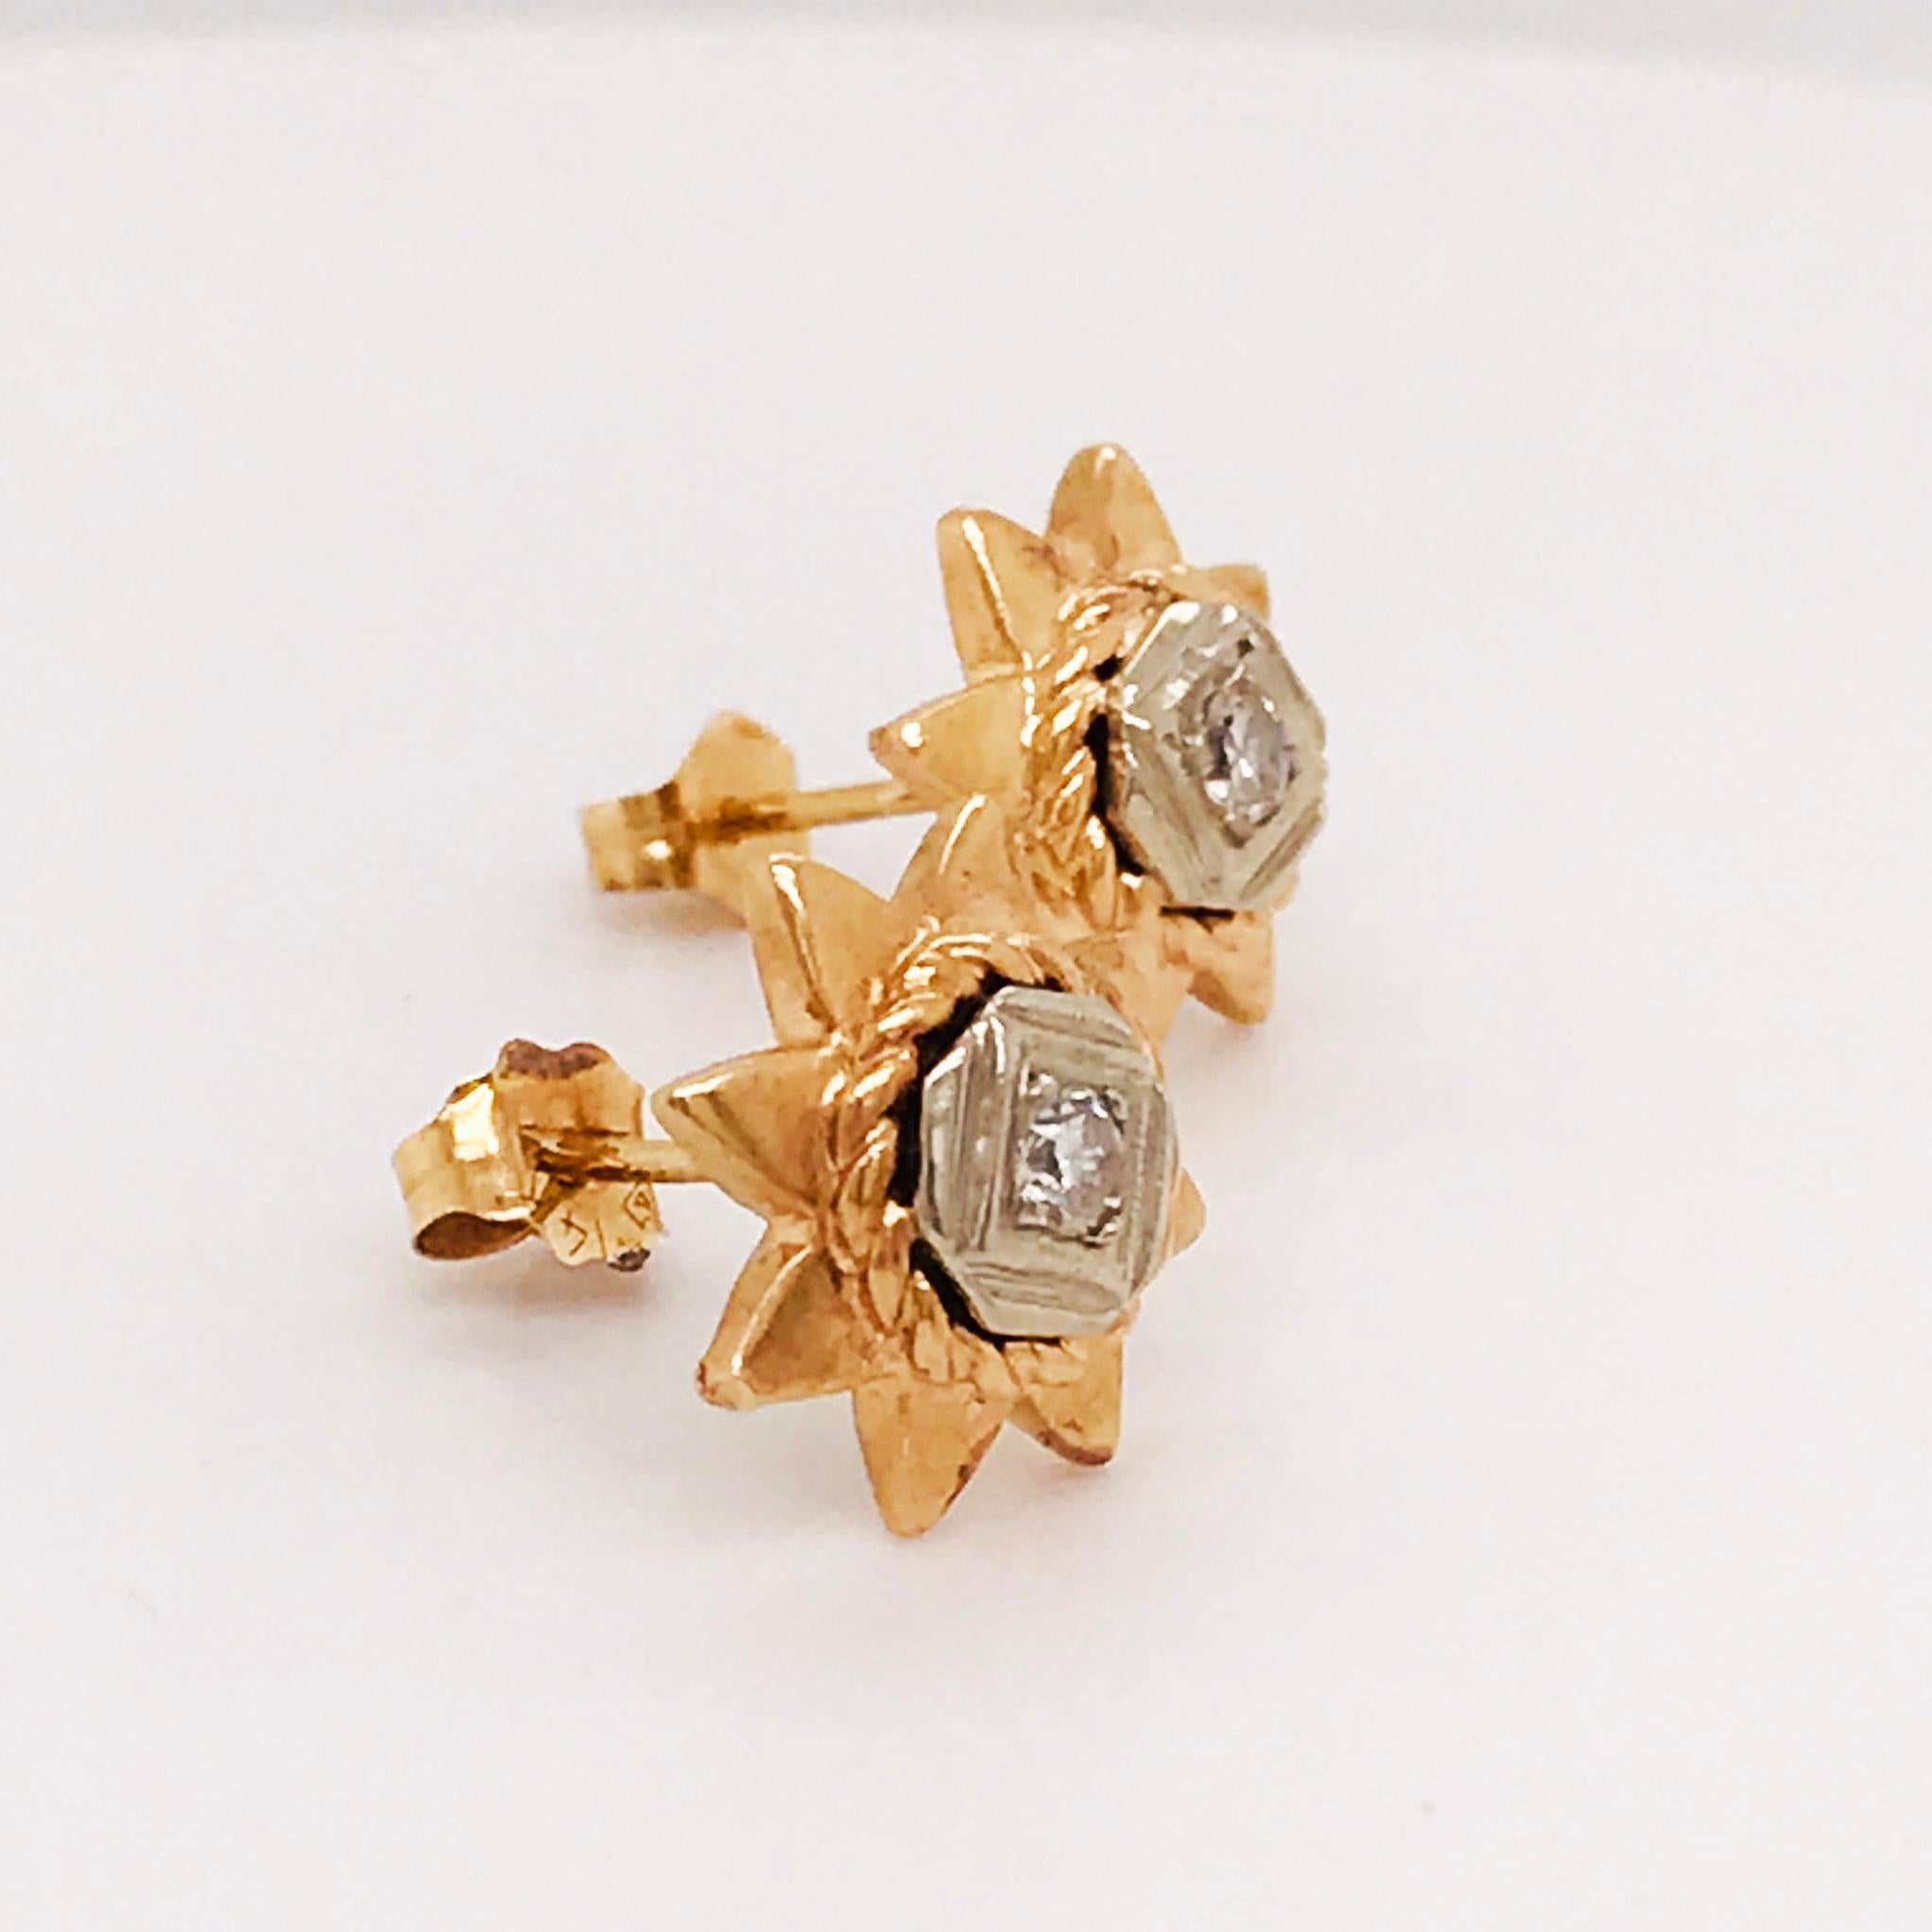 These estate vintage sun diamond earring studs are too cute! With a round diamond set in a white gold setting and a yellow gold sun frame around it. The studs are 10 mm wide which is a perfect size for everyday wear. The can be casual and dressed